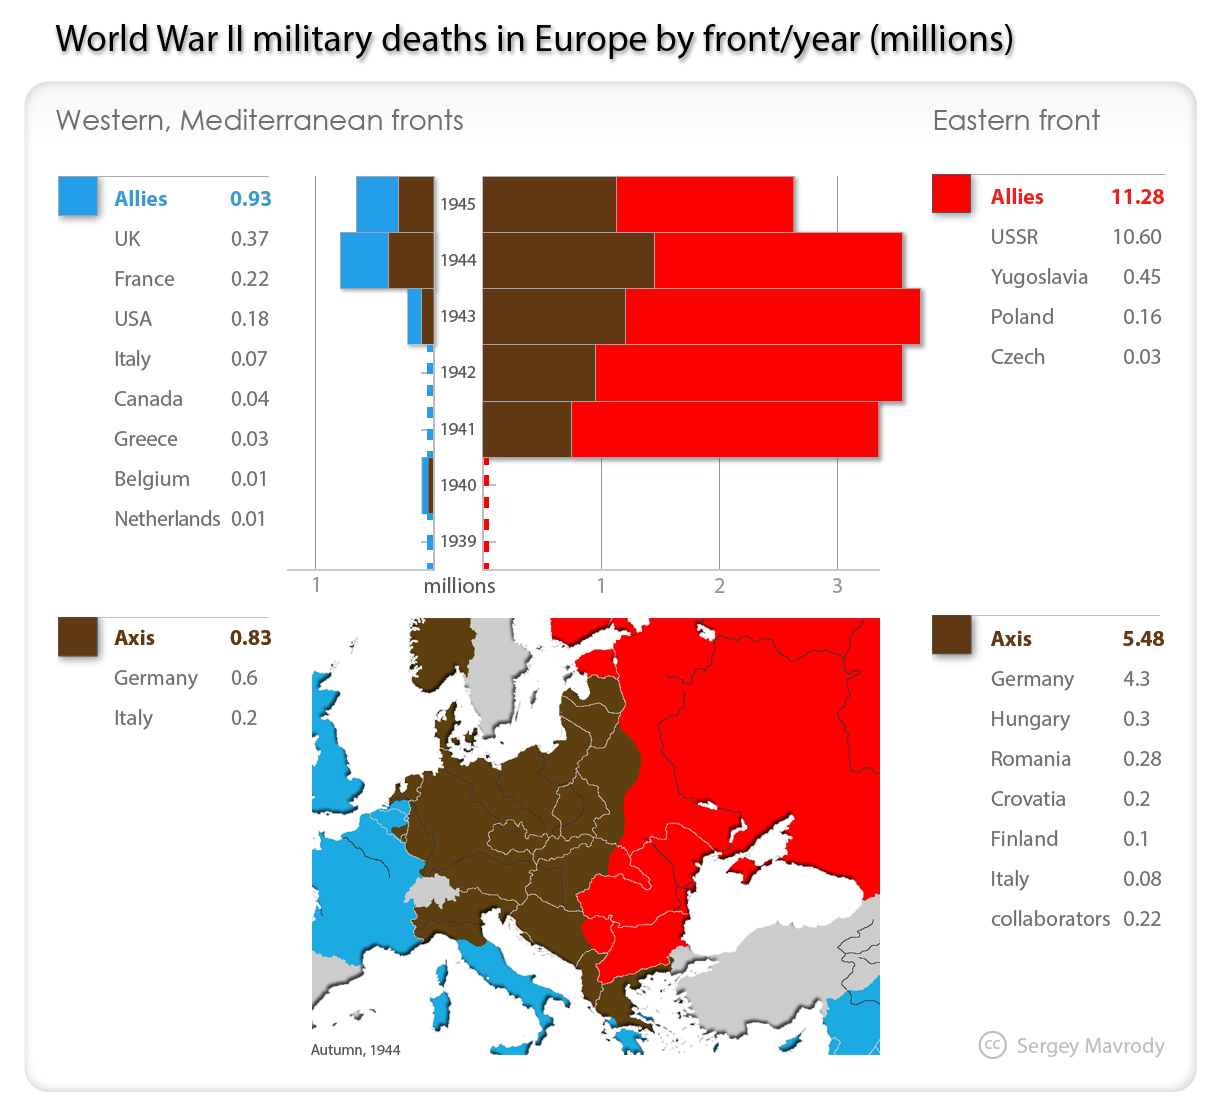 World-War-II-military-deaths-in-Europe-by-theater-year.png